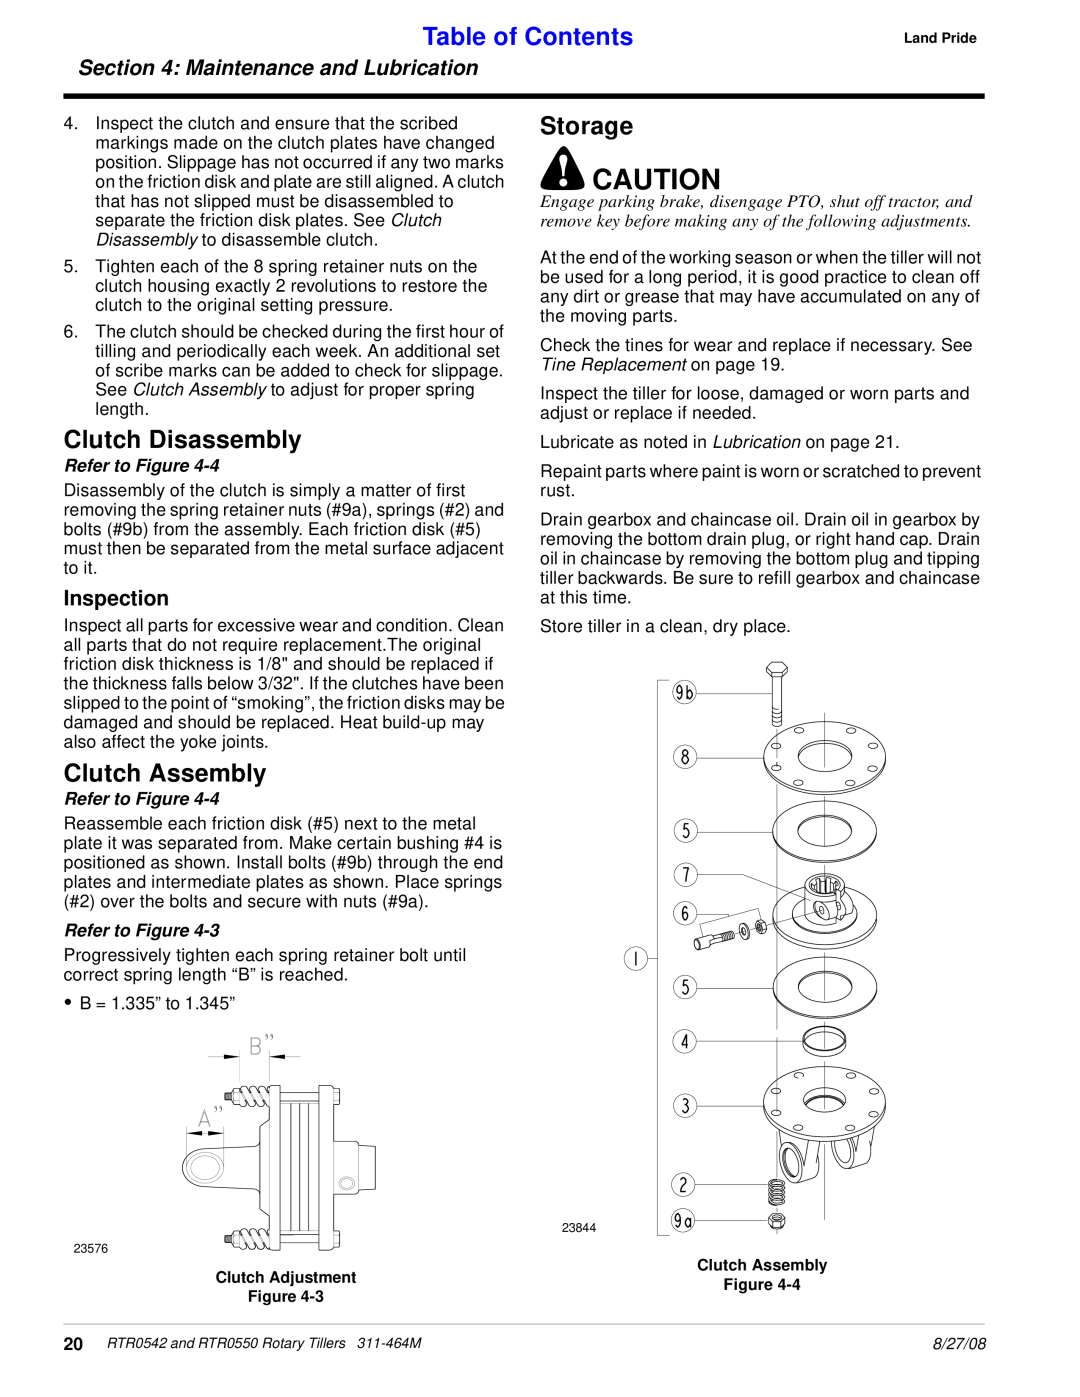 Land Pride RTR0542, RTR0550 Clutch Disassembly, Clutch Assembly, Storage, Table of Contents, Maintenance and Lubrication 